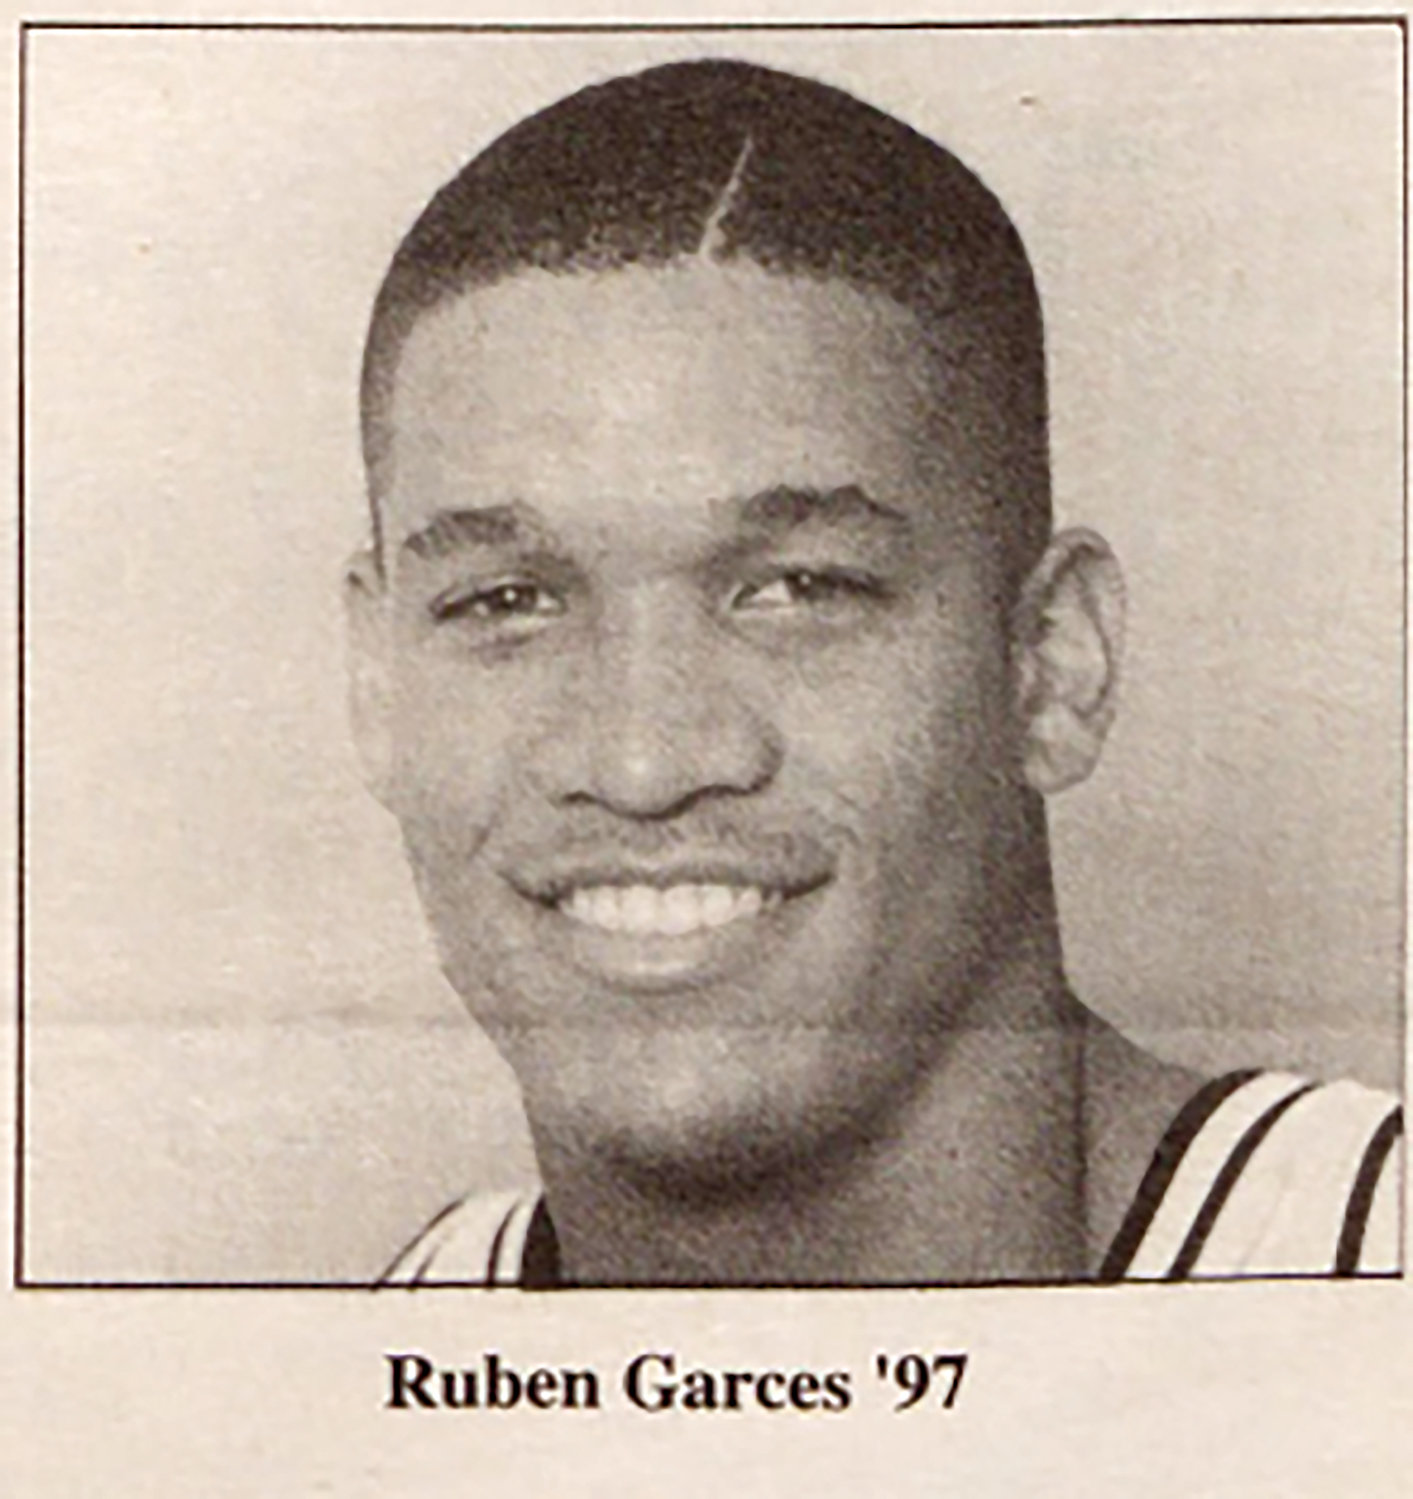 A photo from the October 12, 1995, March Madness edition of “The Cowl,” the student newspaper for the Providence College campus. In an article from the same edition, the 6’9” center discussed his dedication to the team and making his school work a priority. “I’m not the kind of guy that goes out a lot…I came here to get something done. I didn’t come here to party or go out a lot. I came here to play ball and finish my schooling. I like to study. That’s why I came here, because I knew if I did my best I can graduate from here.”